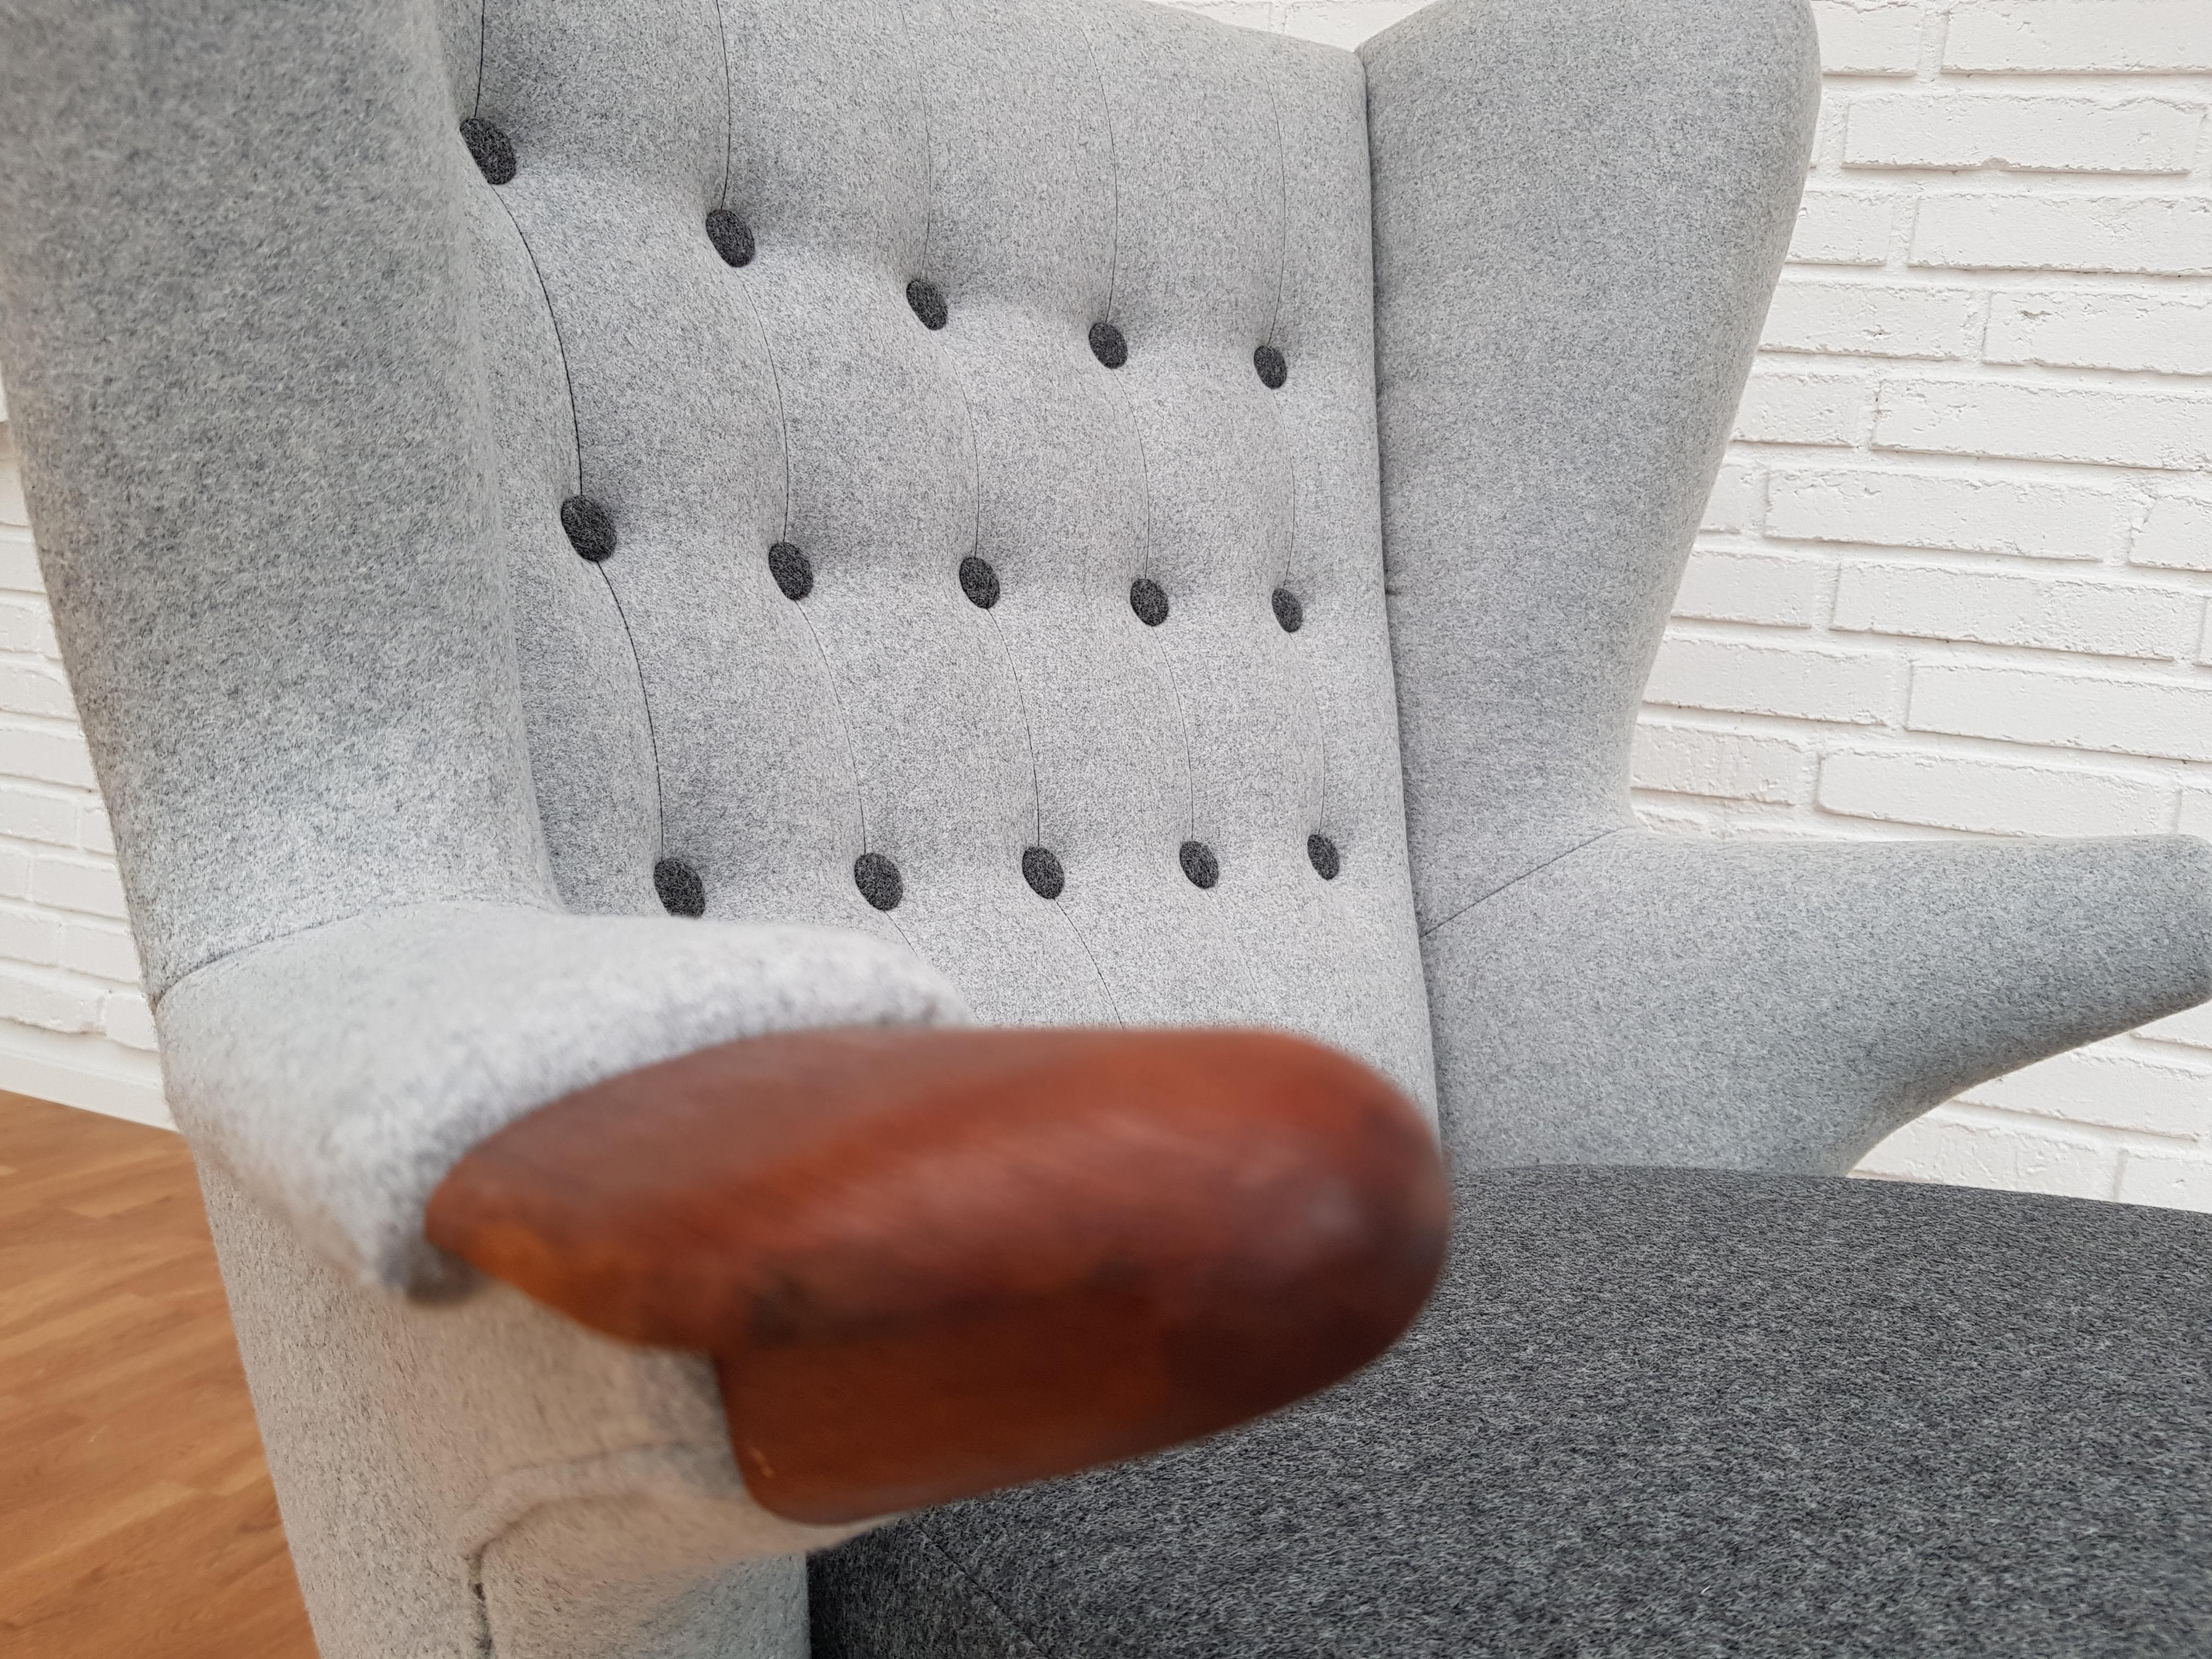 Svend skipper. Armchair 'Teddy bear' model 91, with teak wood nails and legs. Stool with legs of stained beech wood. Designed in the 1950s. Completely restored at Retro Møbler Galleri by furniture craftsmen. Brand new padding with coconut mat. New